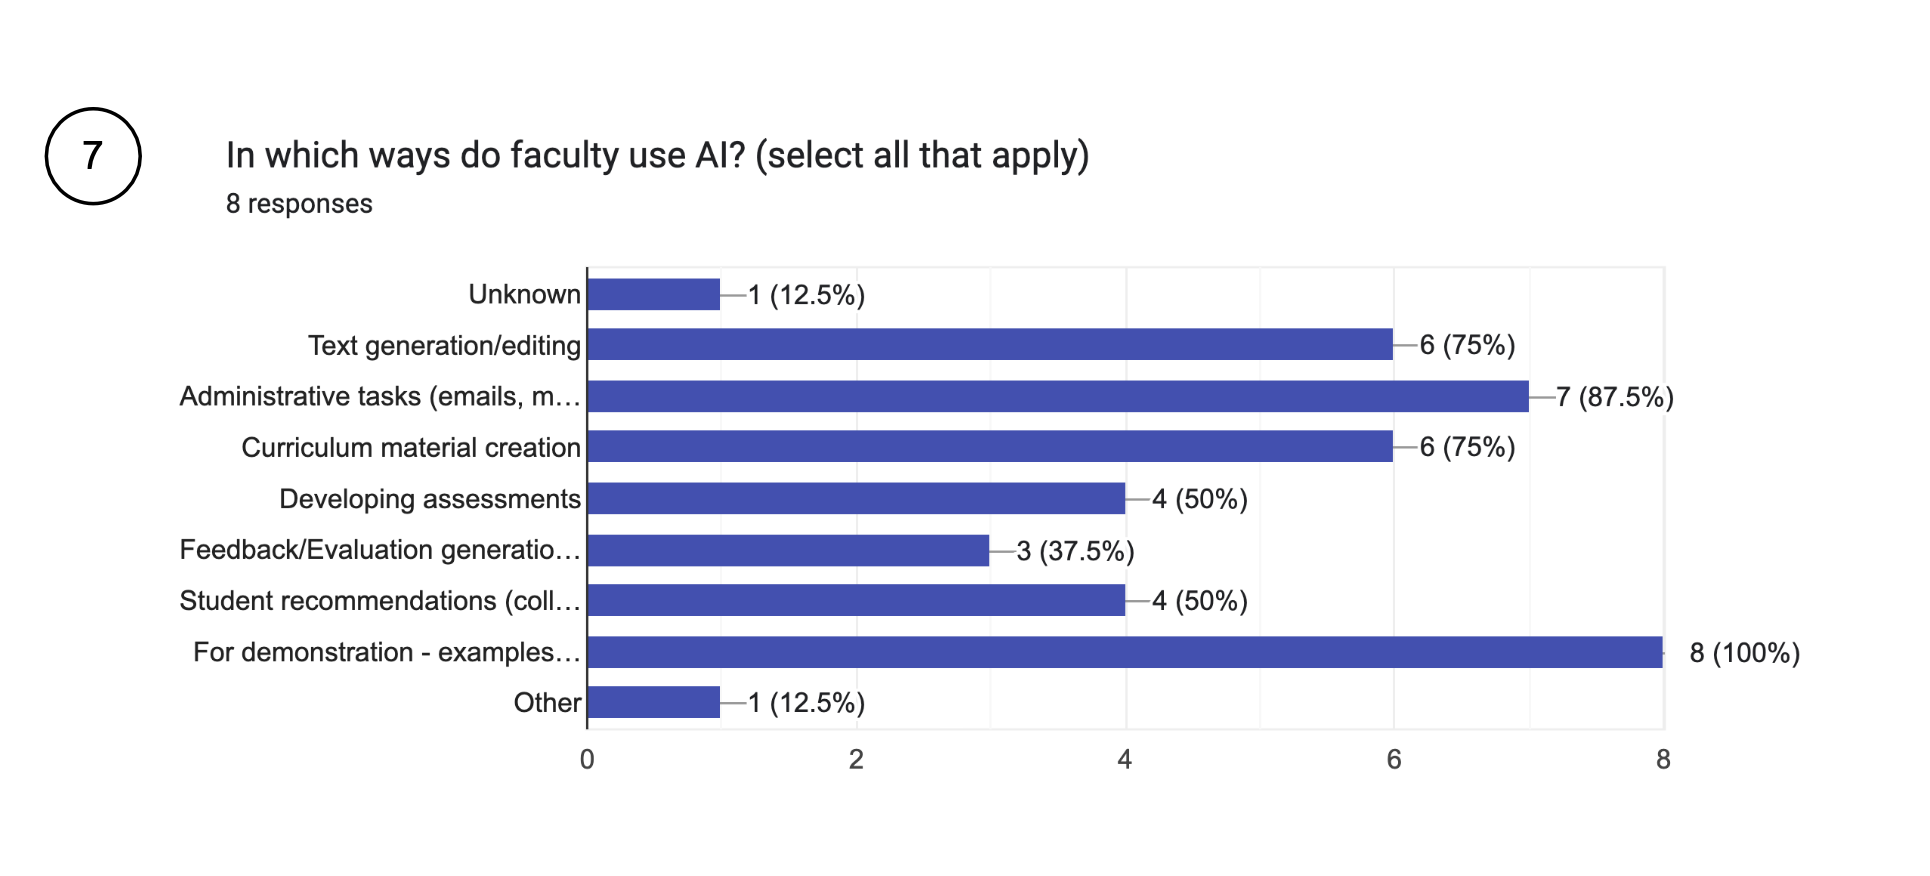 In which ways do faculty use AI?